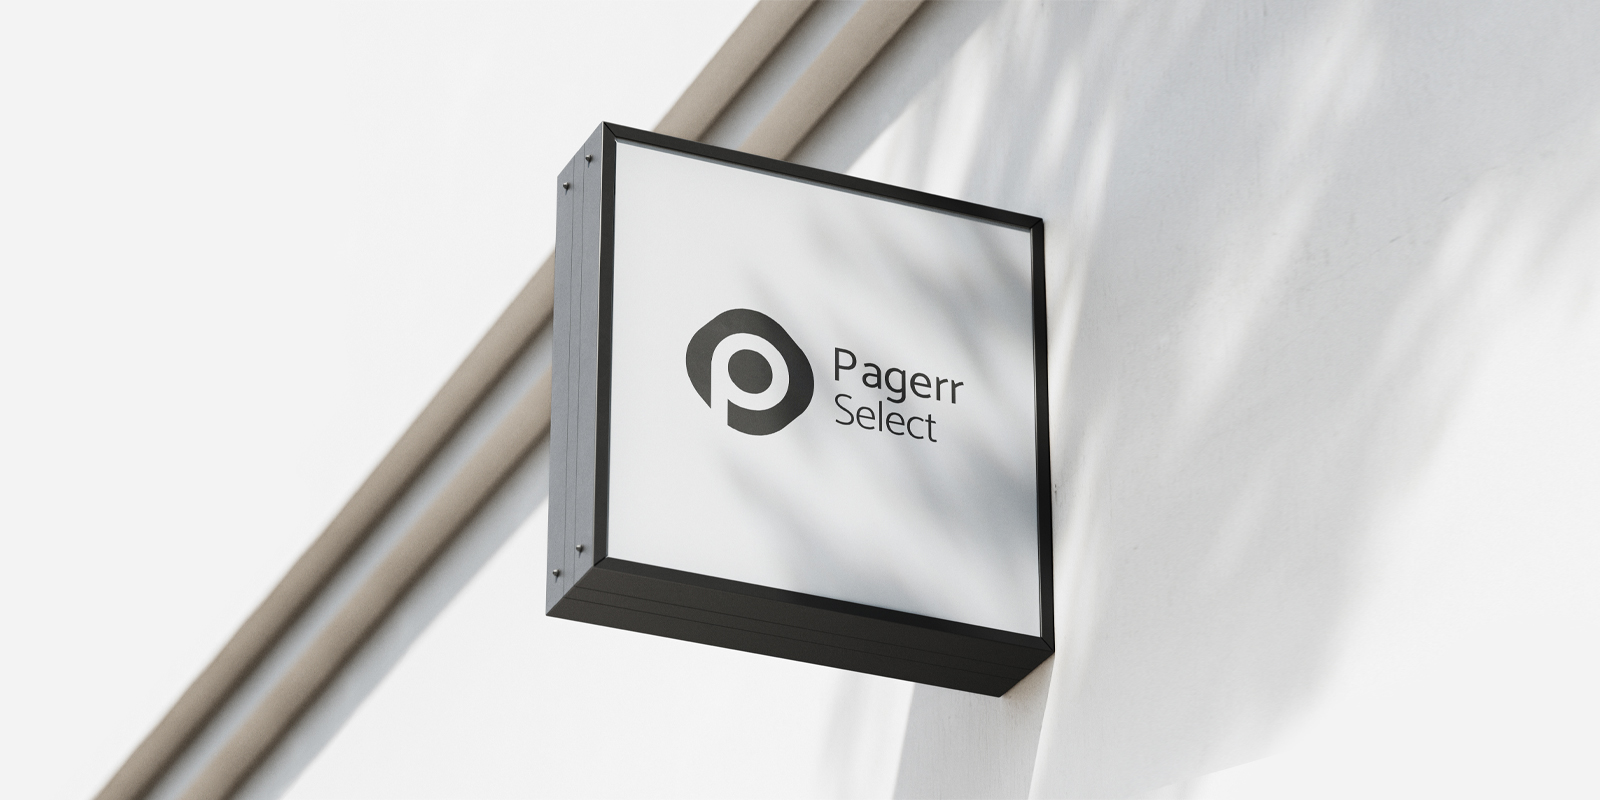 Essential signs in Wollongong - Print with Pagerr